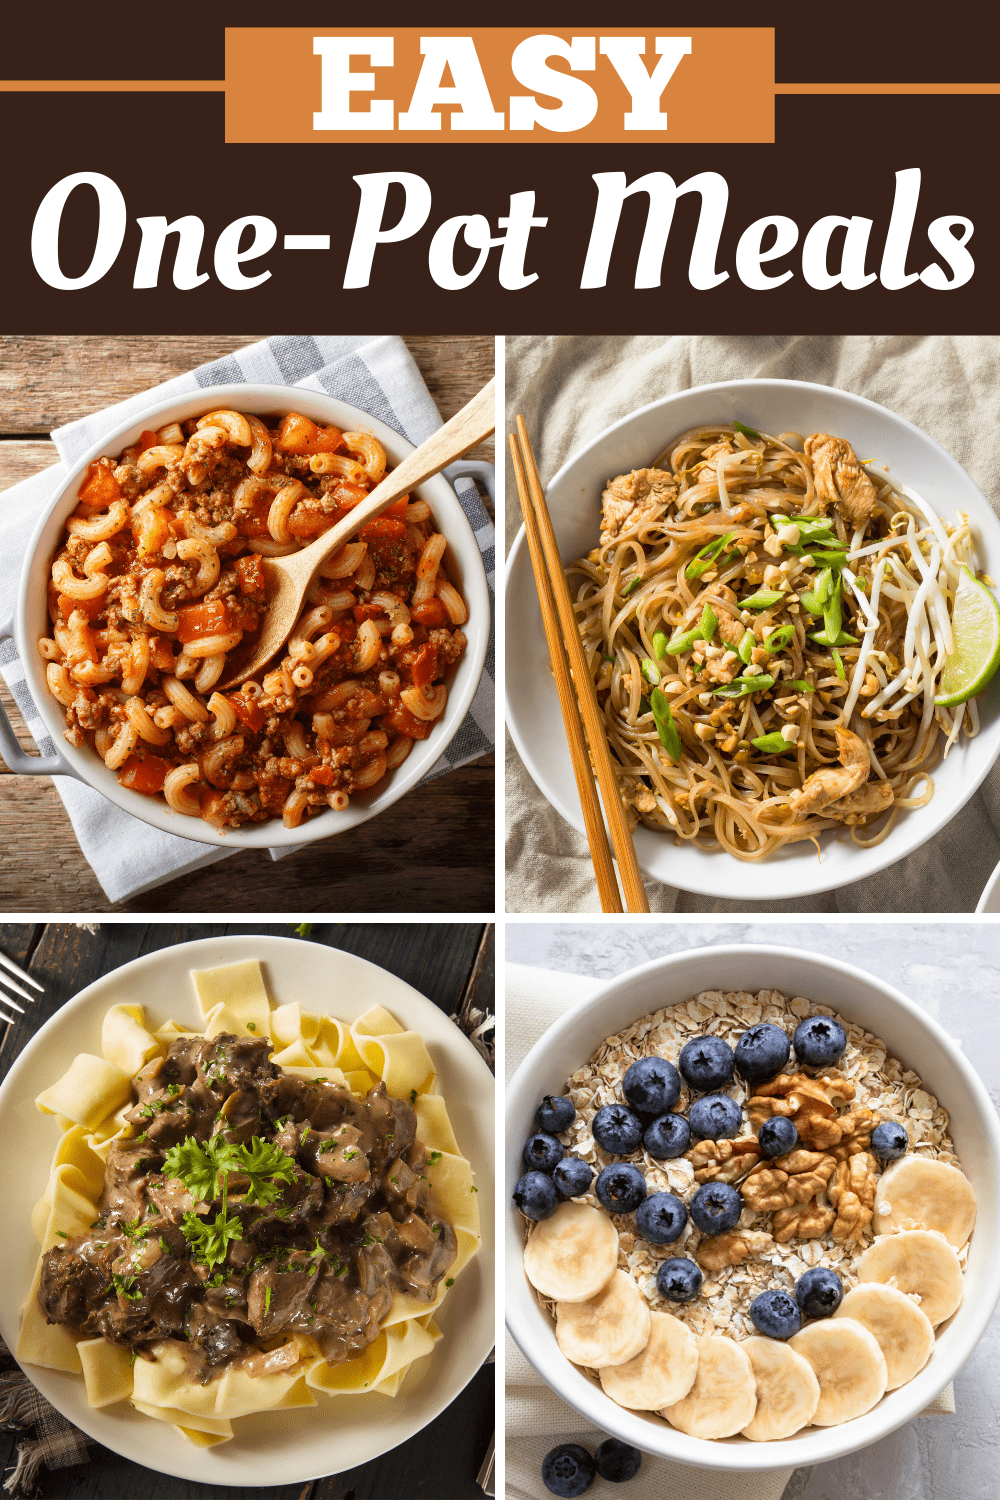 24 Easy One-Pot Meals the Family Will Love - Insanely Good